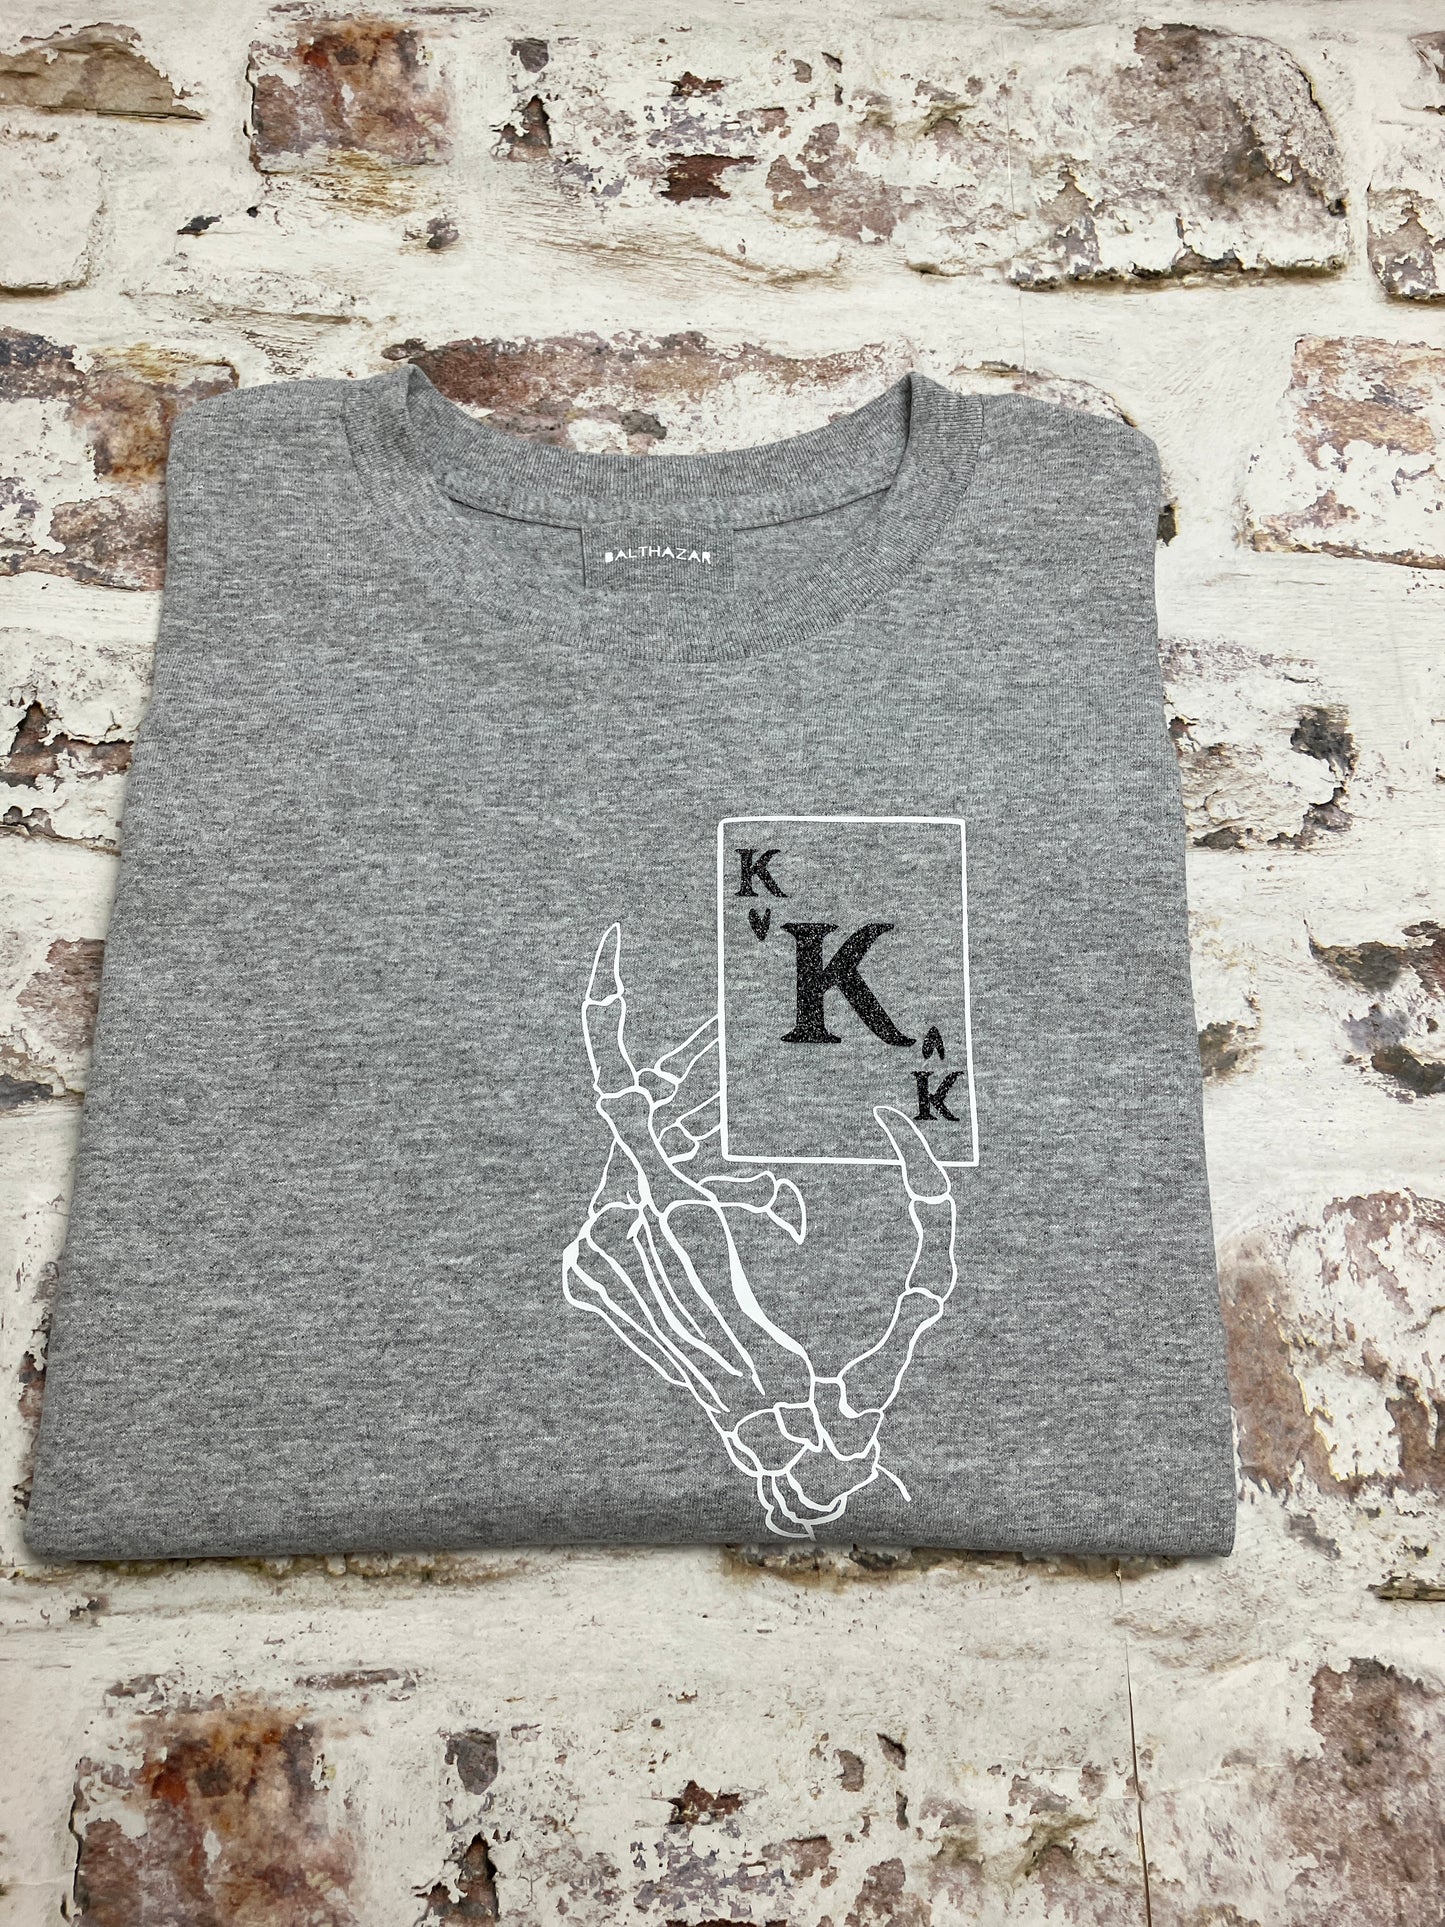 King of hearts skeleton hand t-shirt